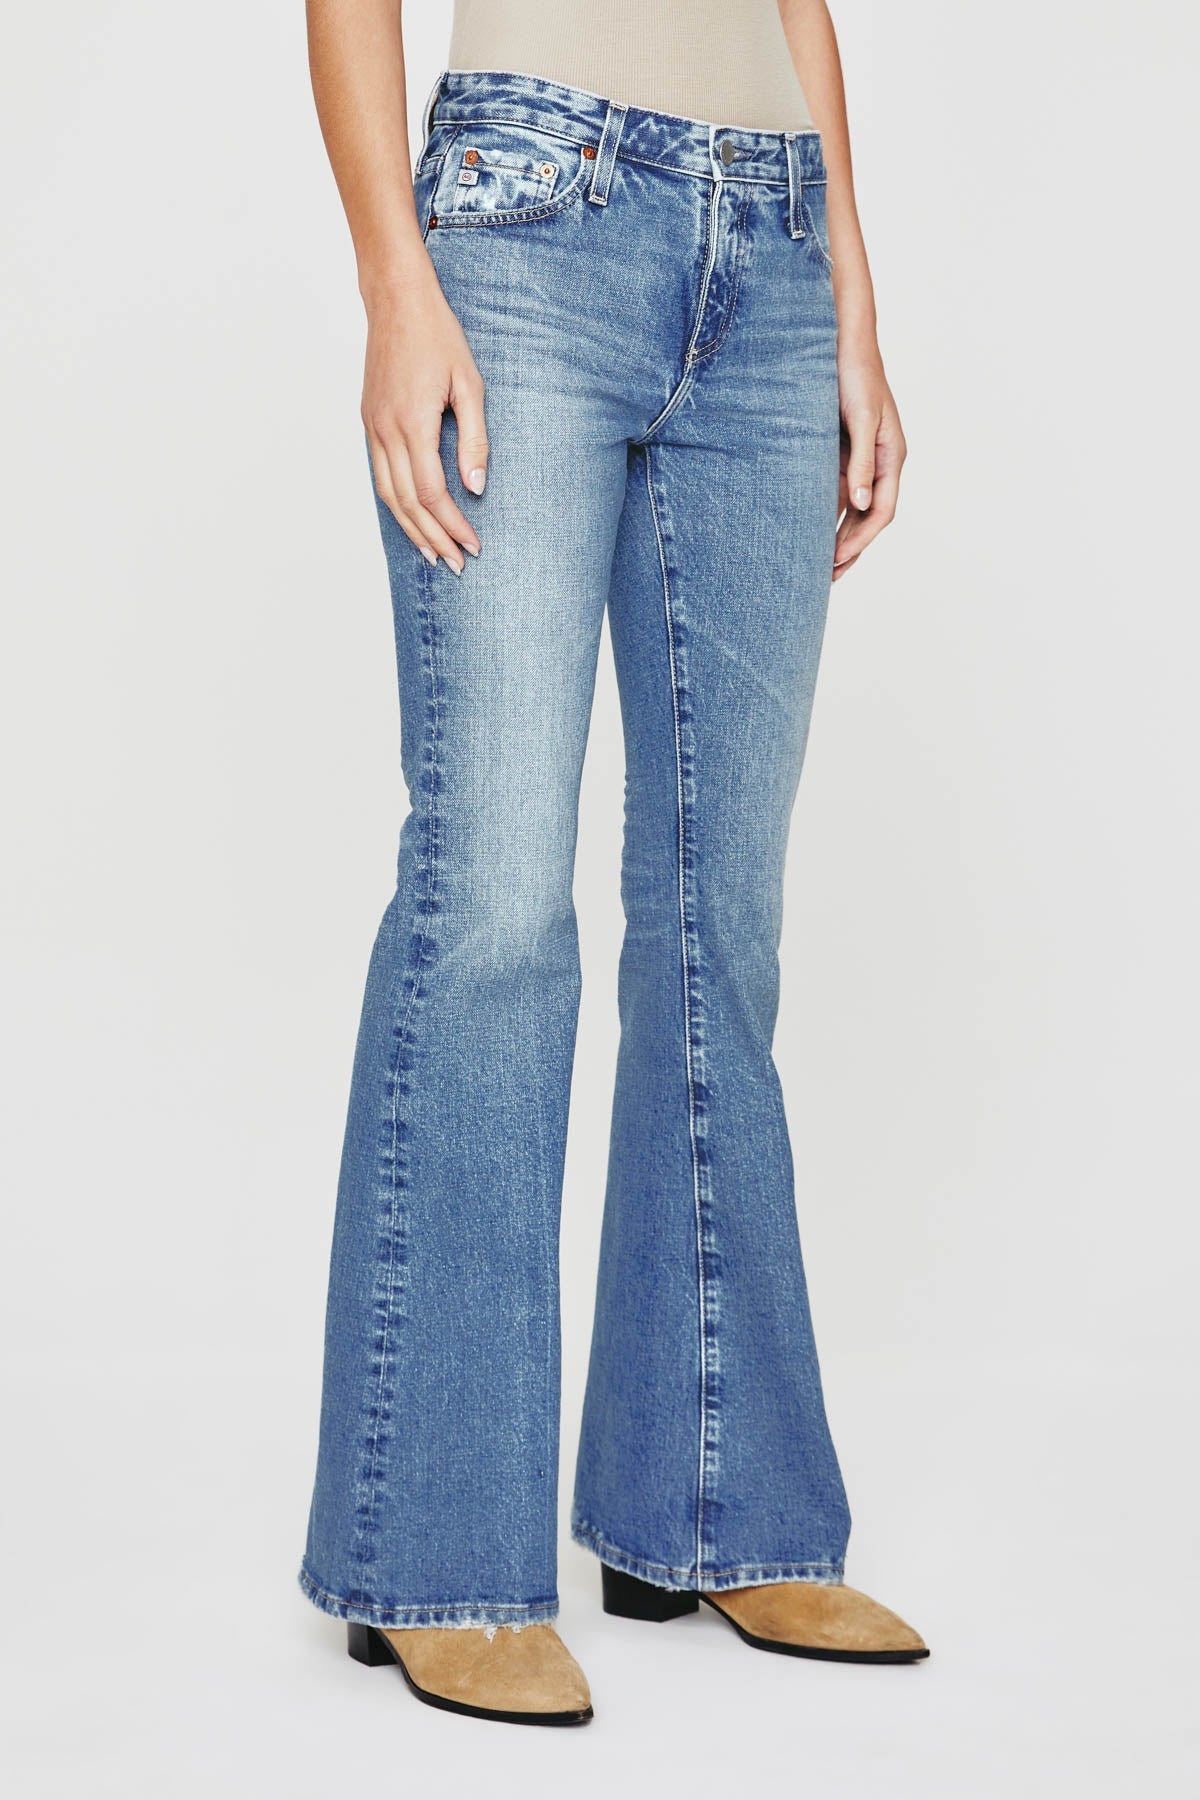 Angeline Mid Rise Flare Jean - AG Jeans - Danali - VBS1D76UB-16YCUO-25